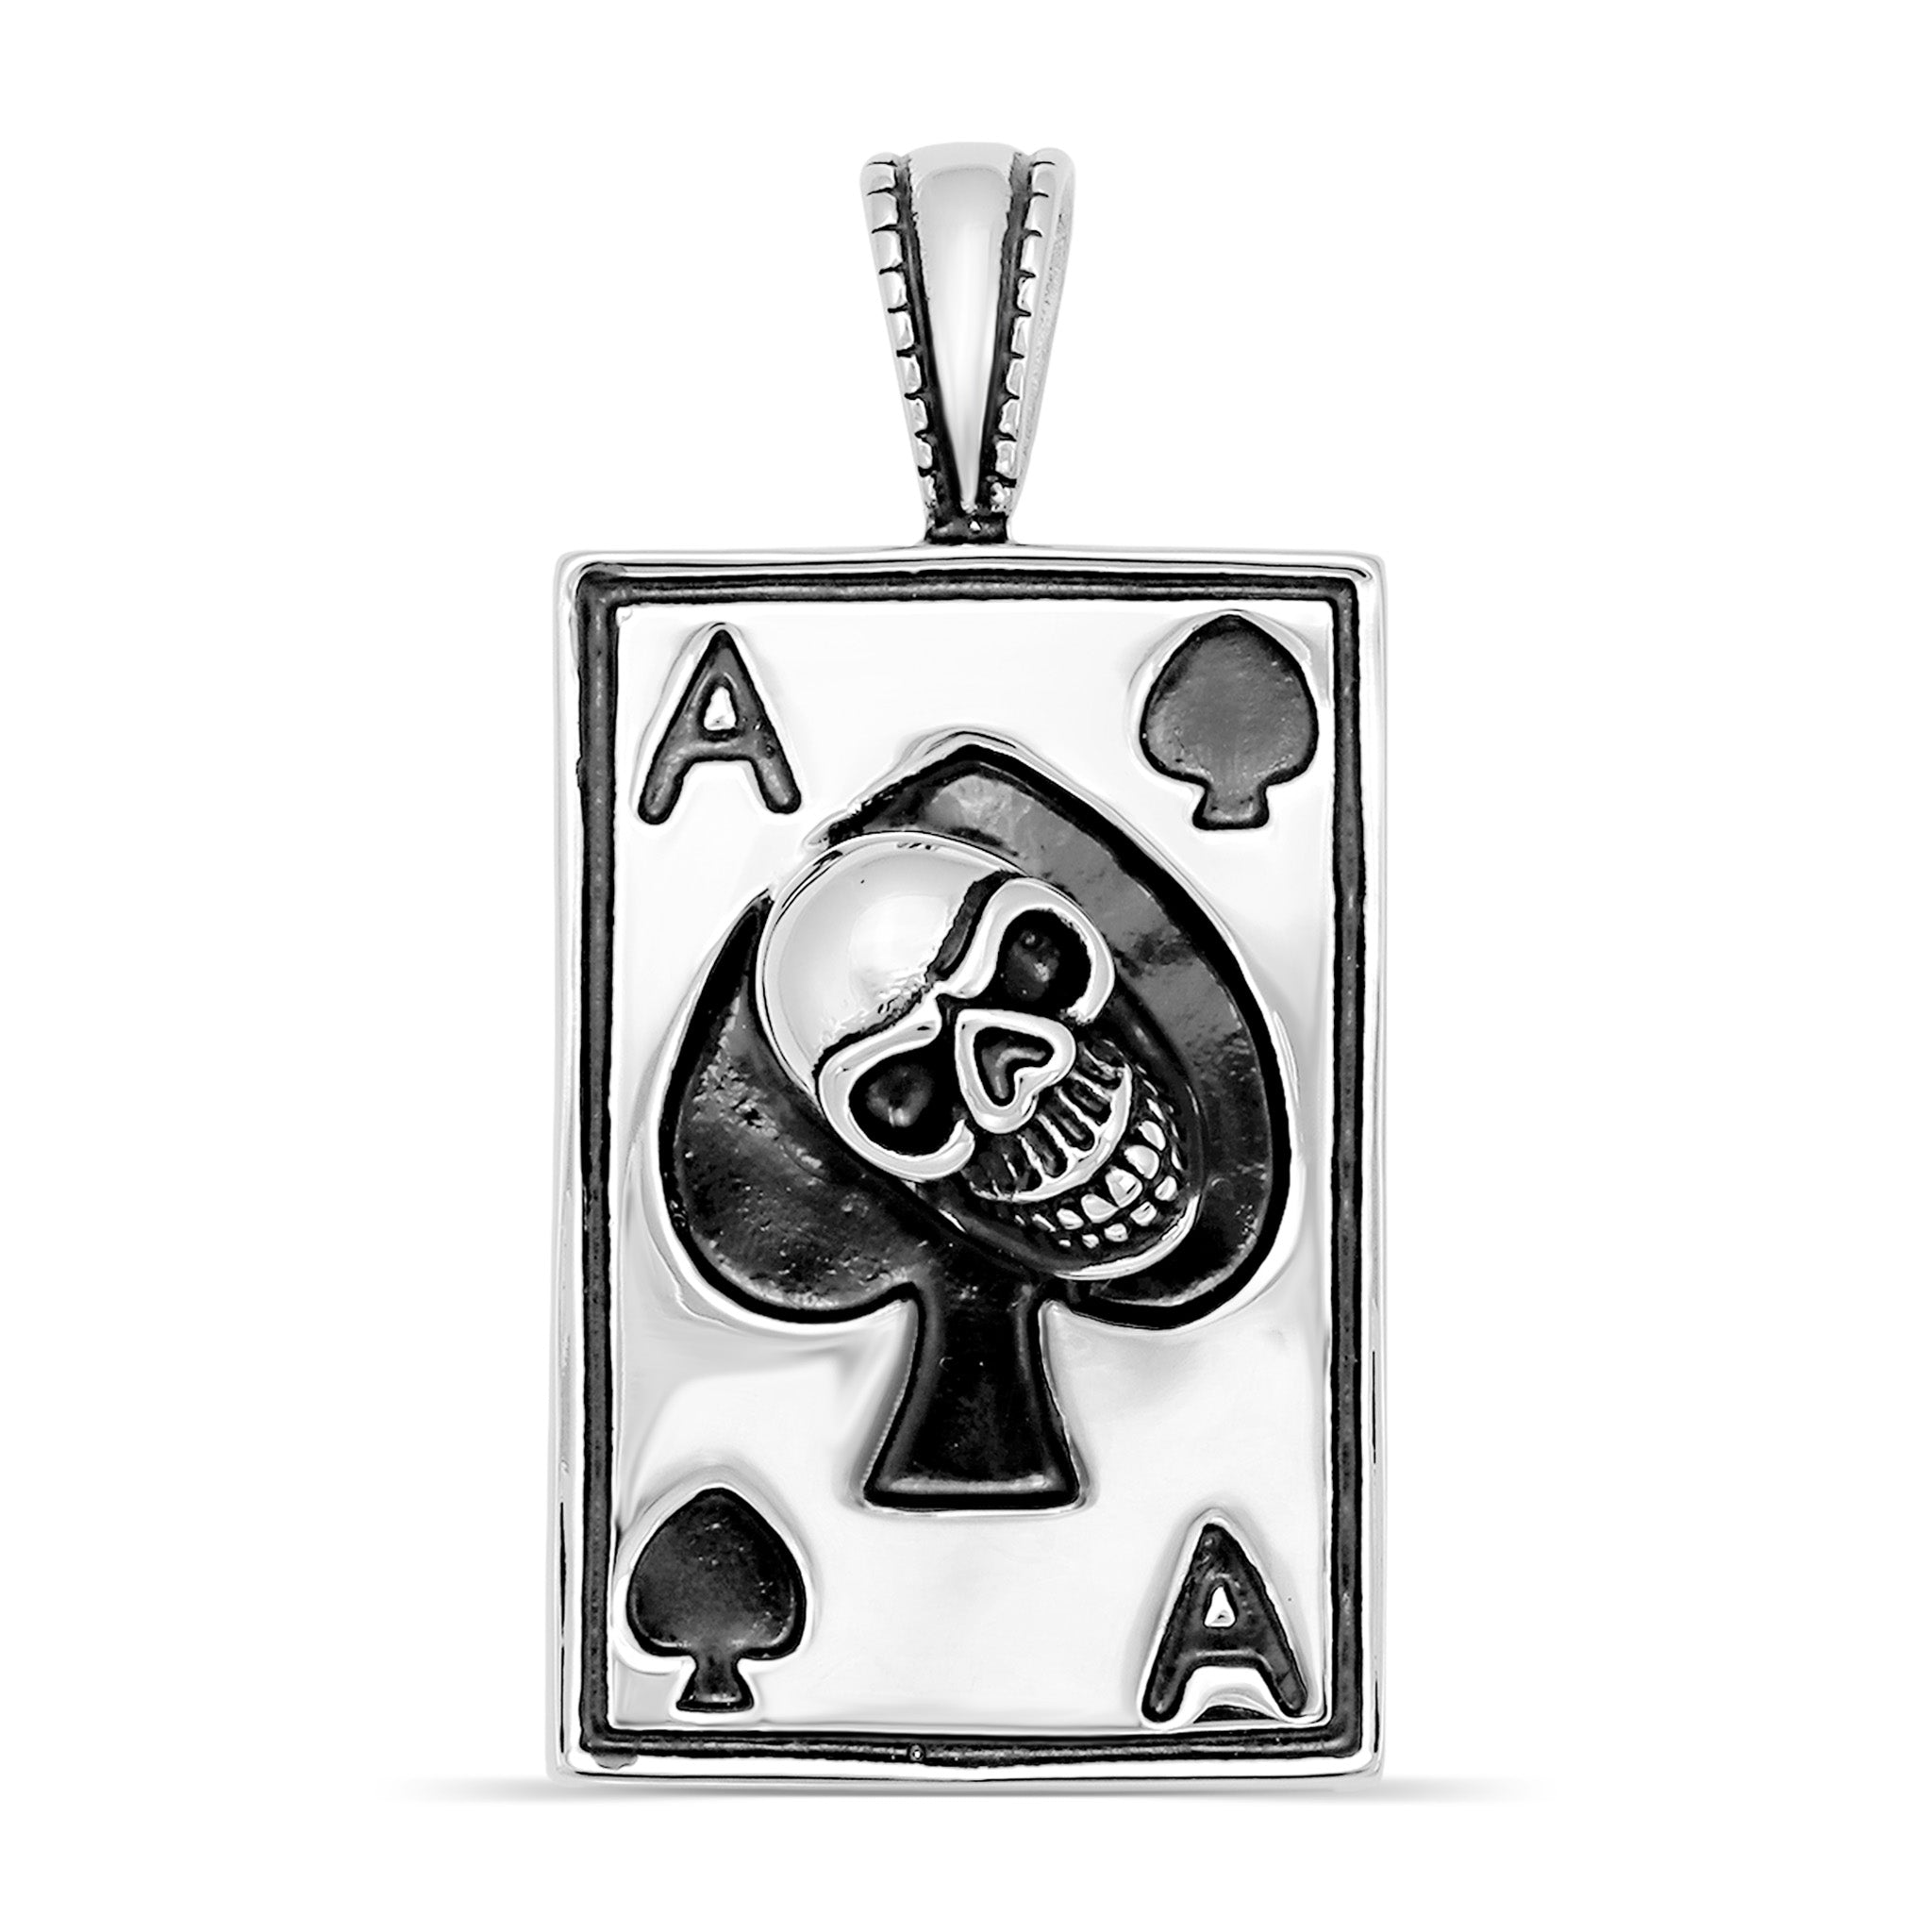 Stainless Steel Large Ace Of Spades With Skull Center Pendant / PDL2020